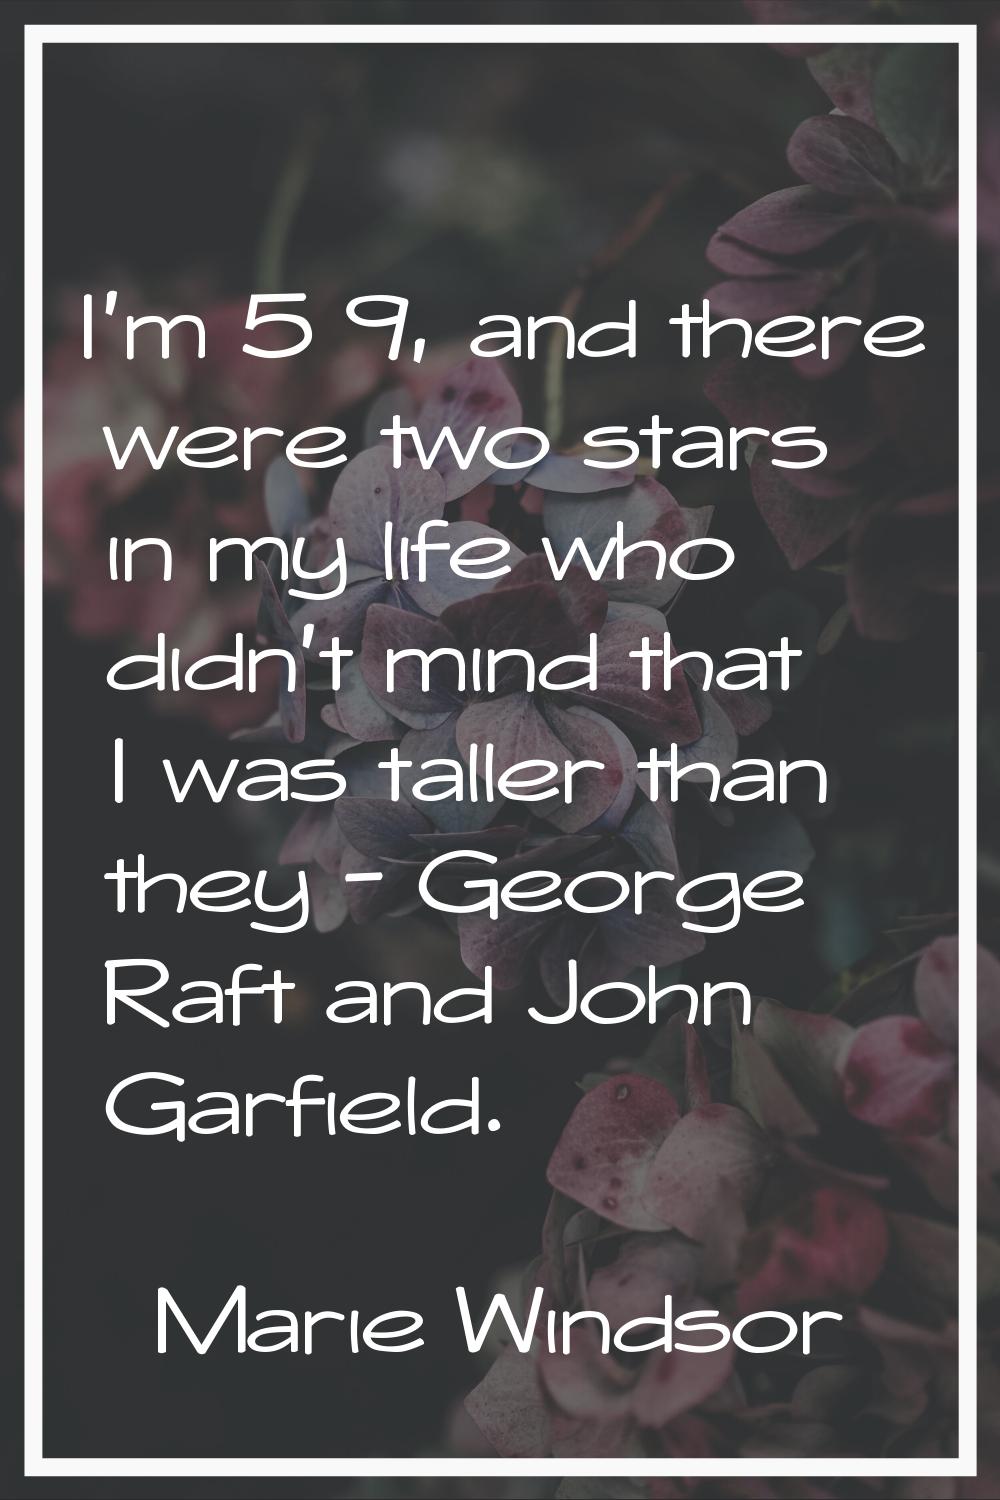 I'm 5 9, and there were two stars in my life who didn't mind that I was taller than they - George R